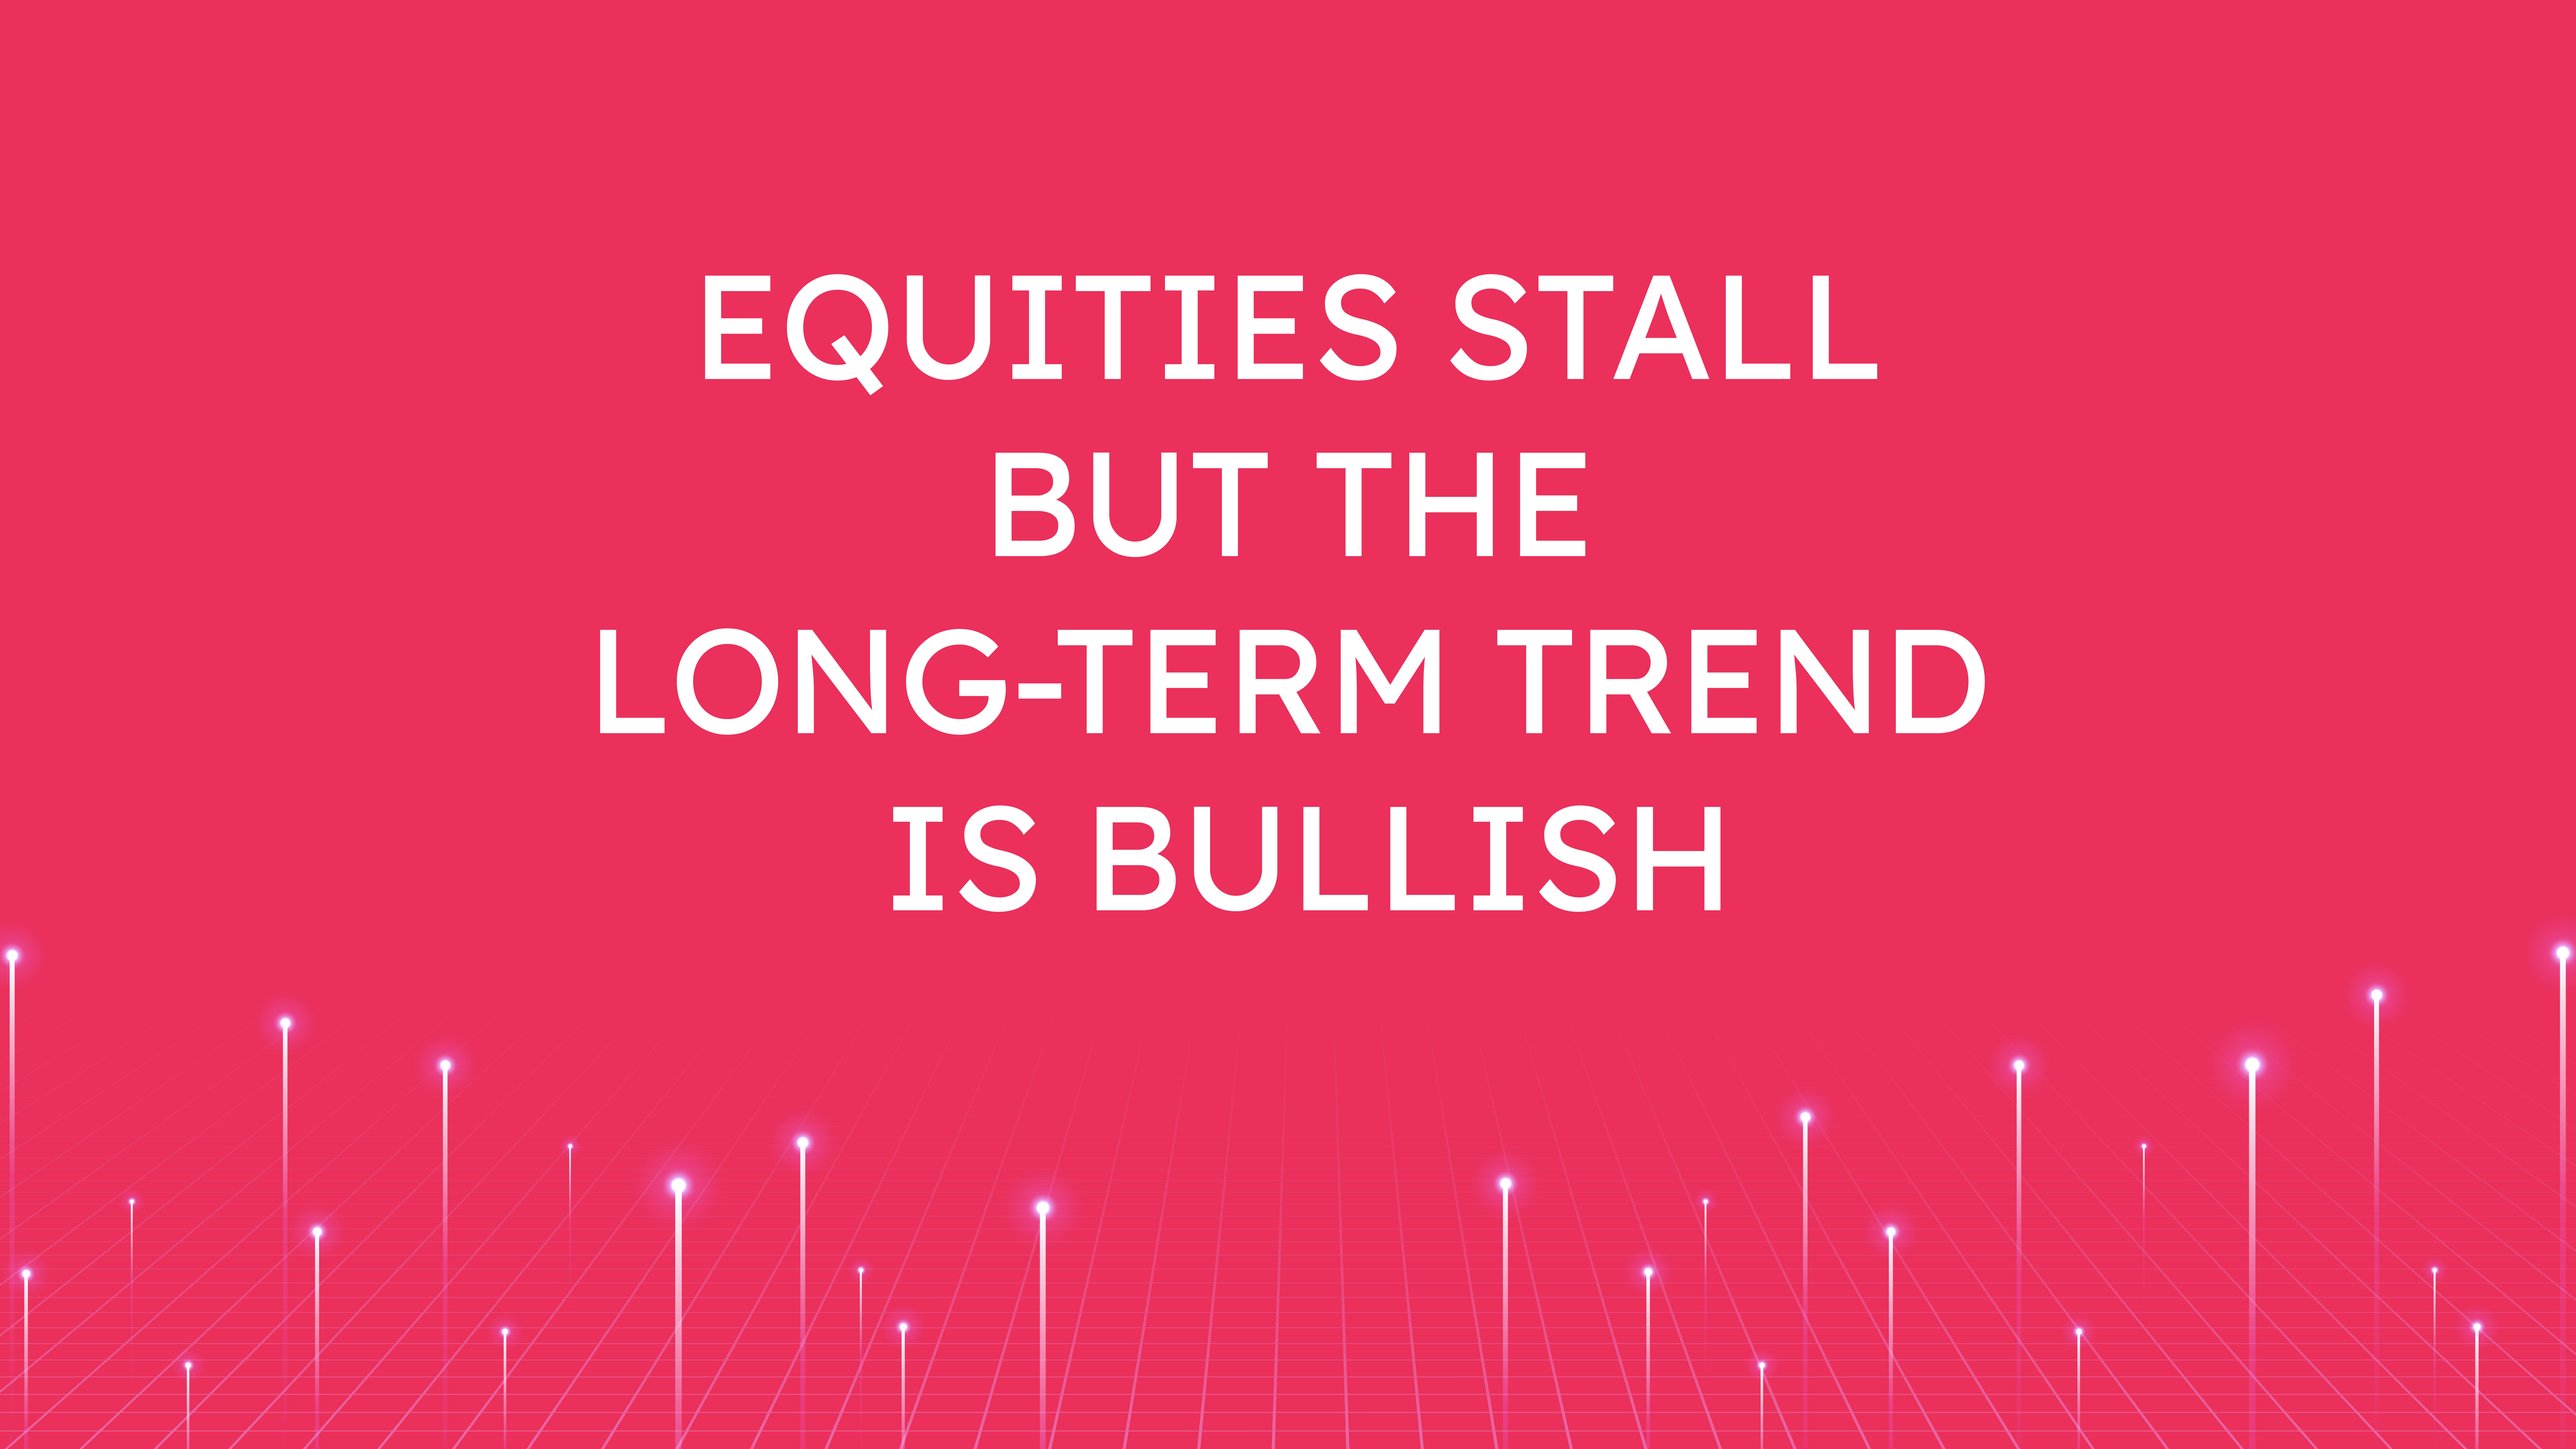 Equities Stall but the Long-Term Trend is Bullish